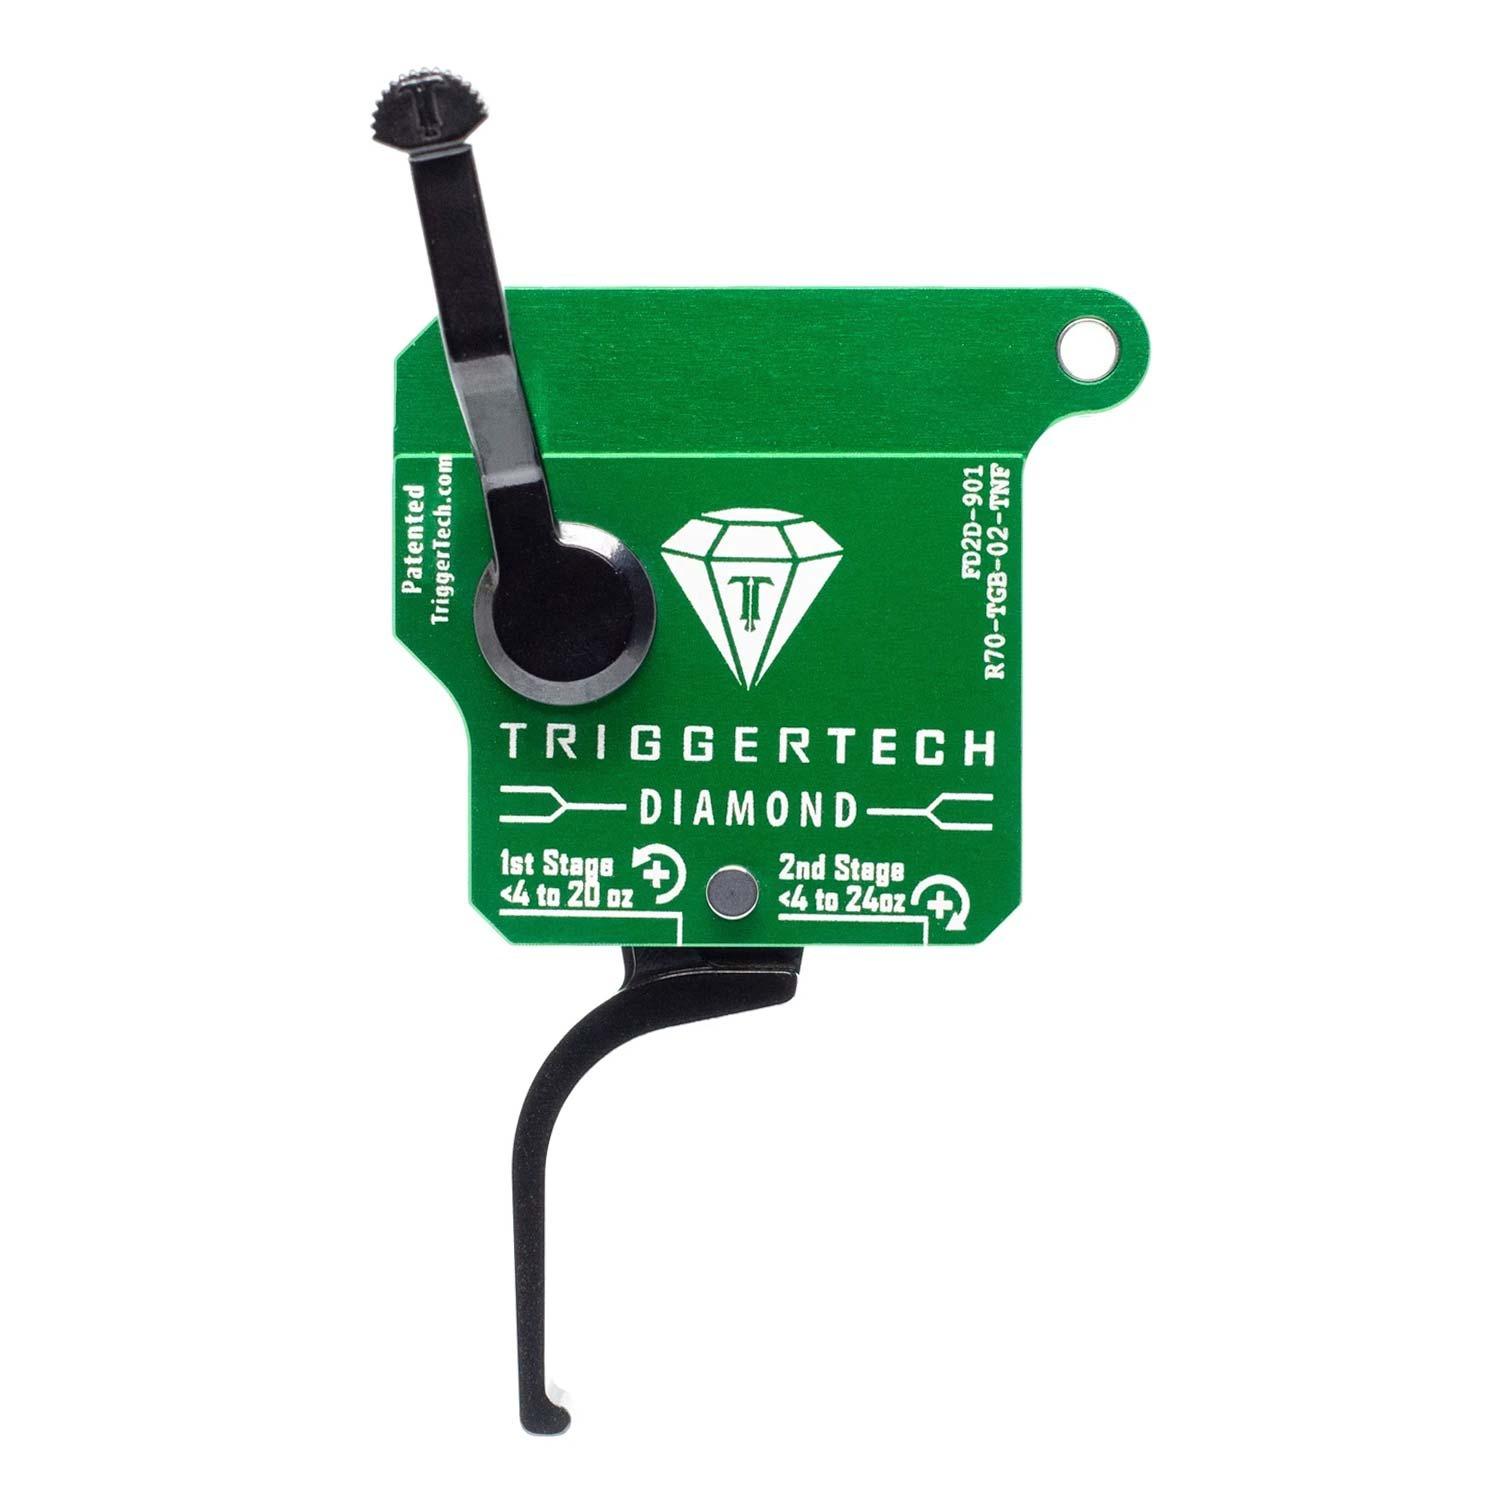  Triggertech Rem 700 Diamond Two- Stage Trigger Flat Right Hand